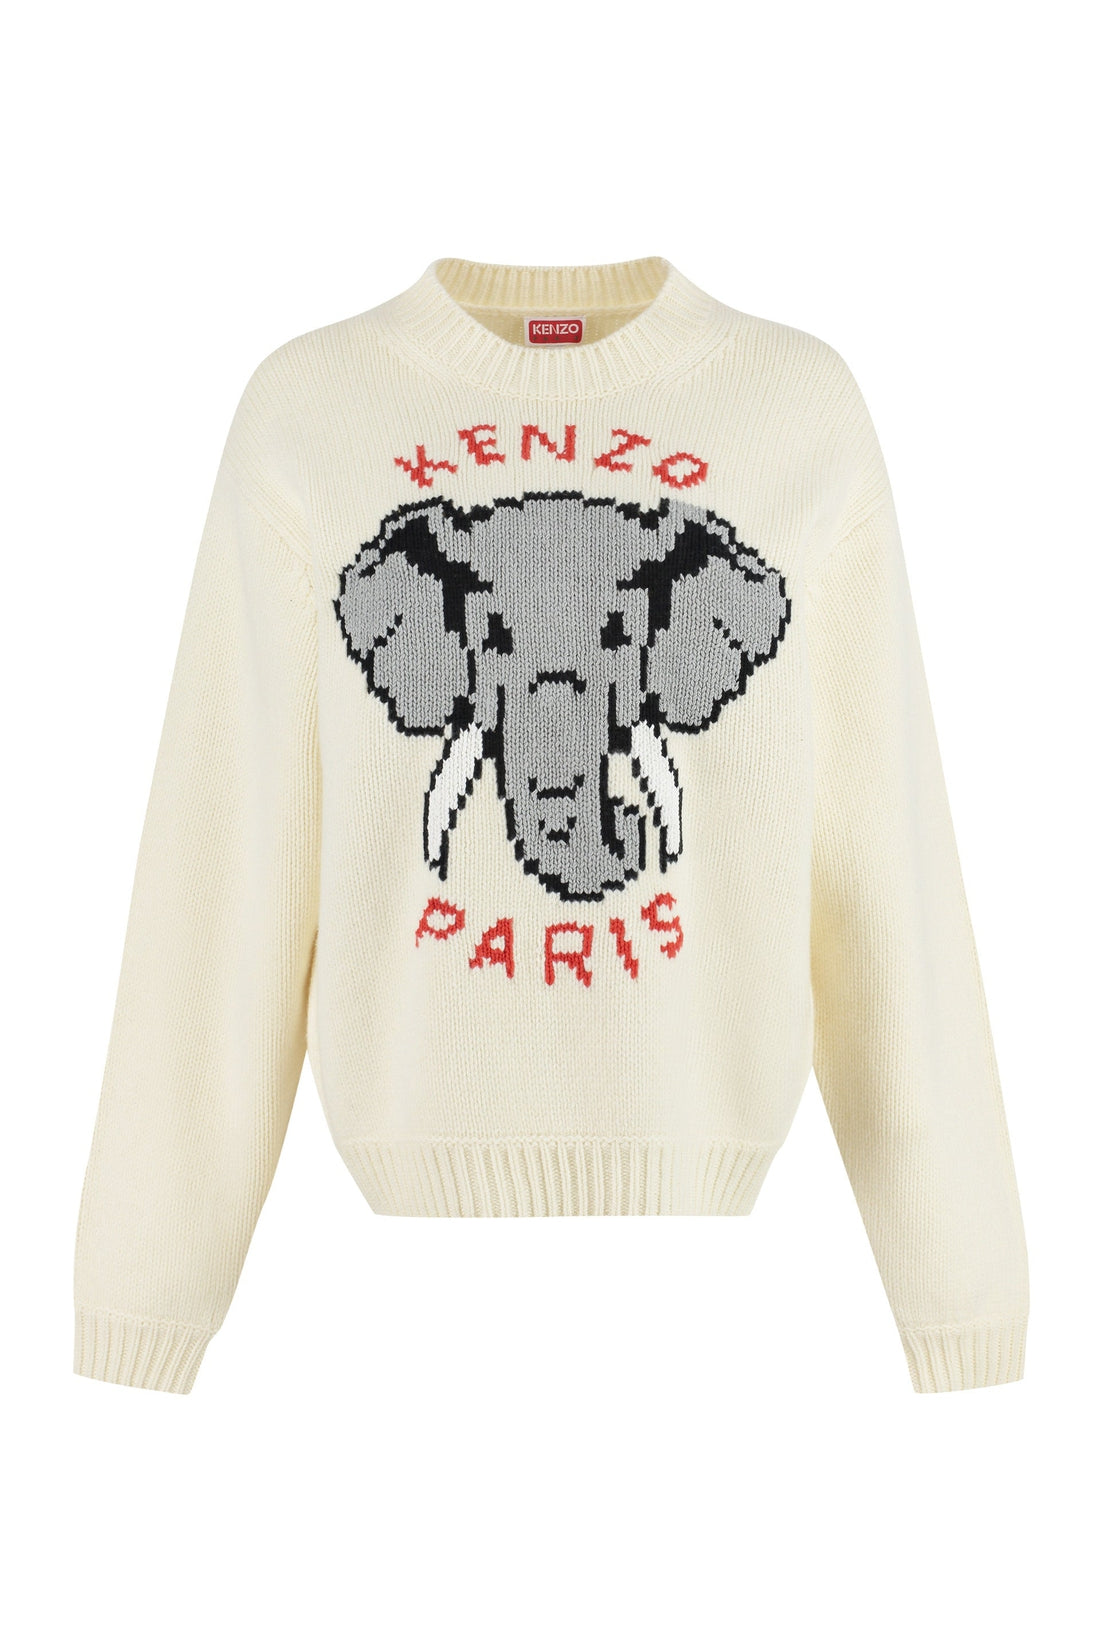 Kenzo-OUTLET-SALE-Cotton-wool blend sweater-ARCHIVIST